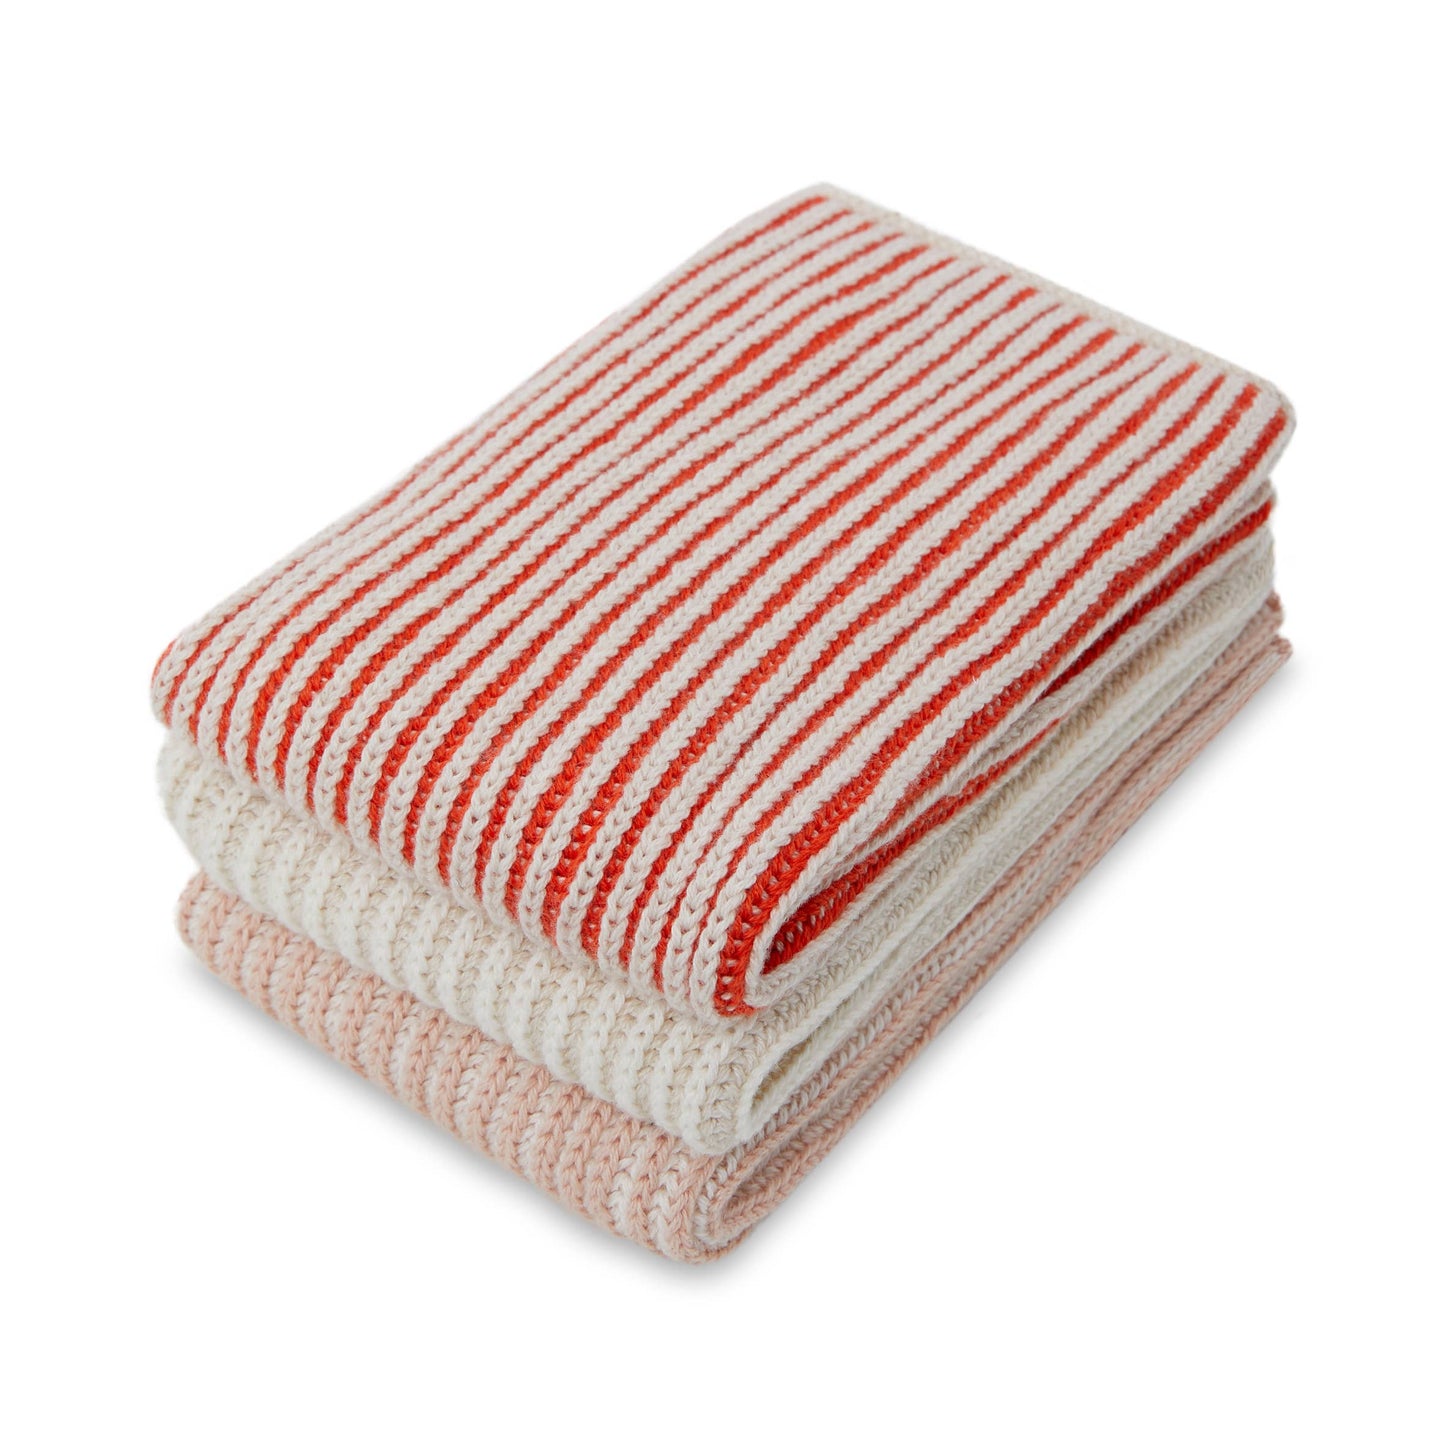 Sophie Home - Reusable & Eco-Friendly Cotton Knit Dishcloths - Ribbed Pink